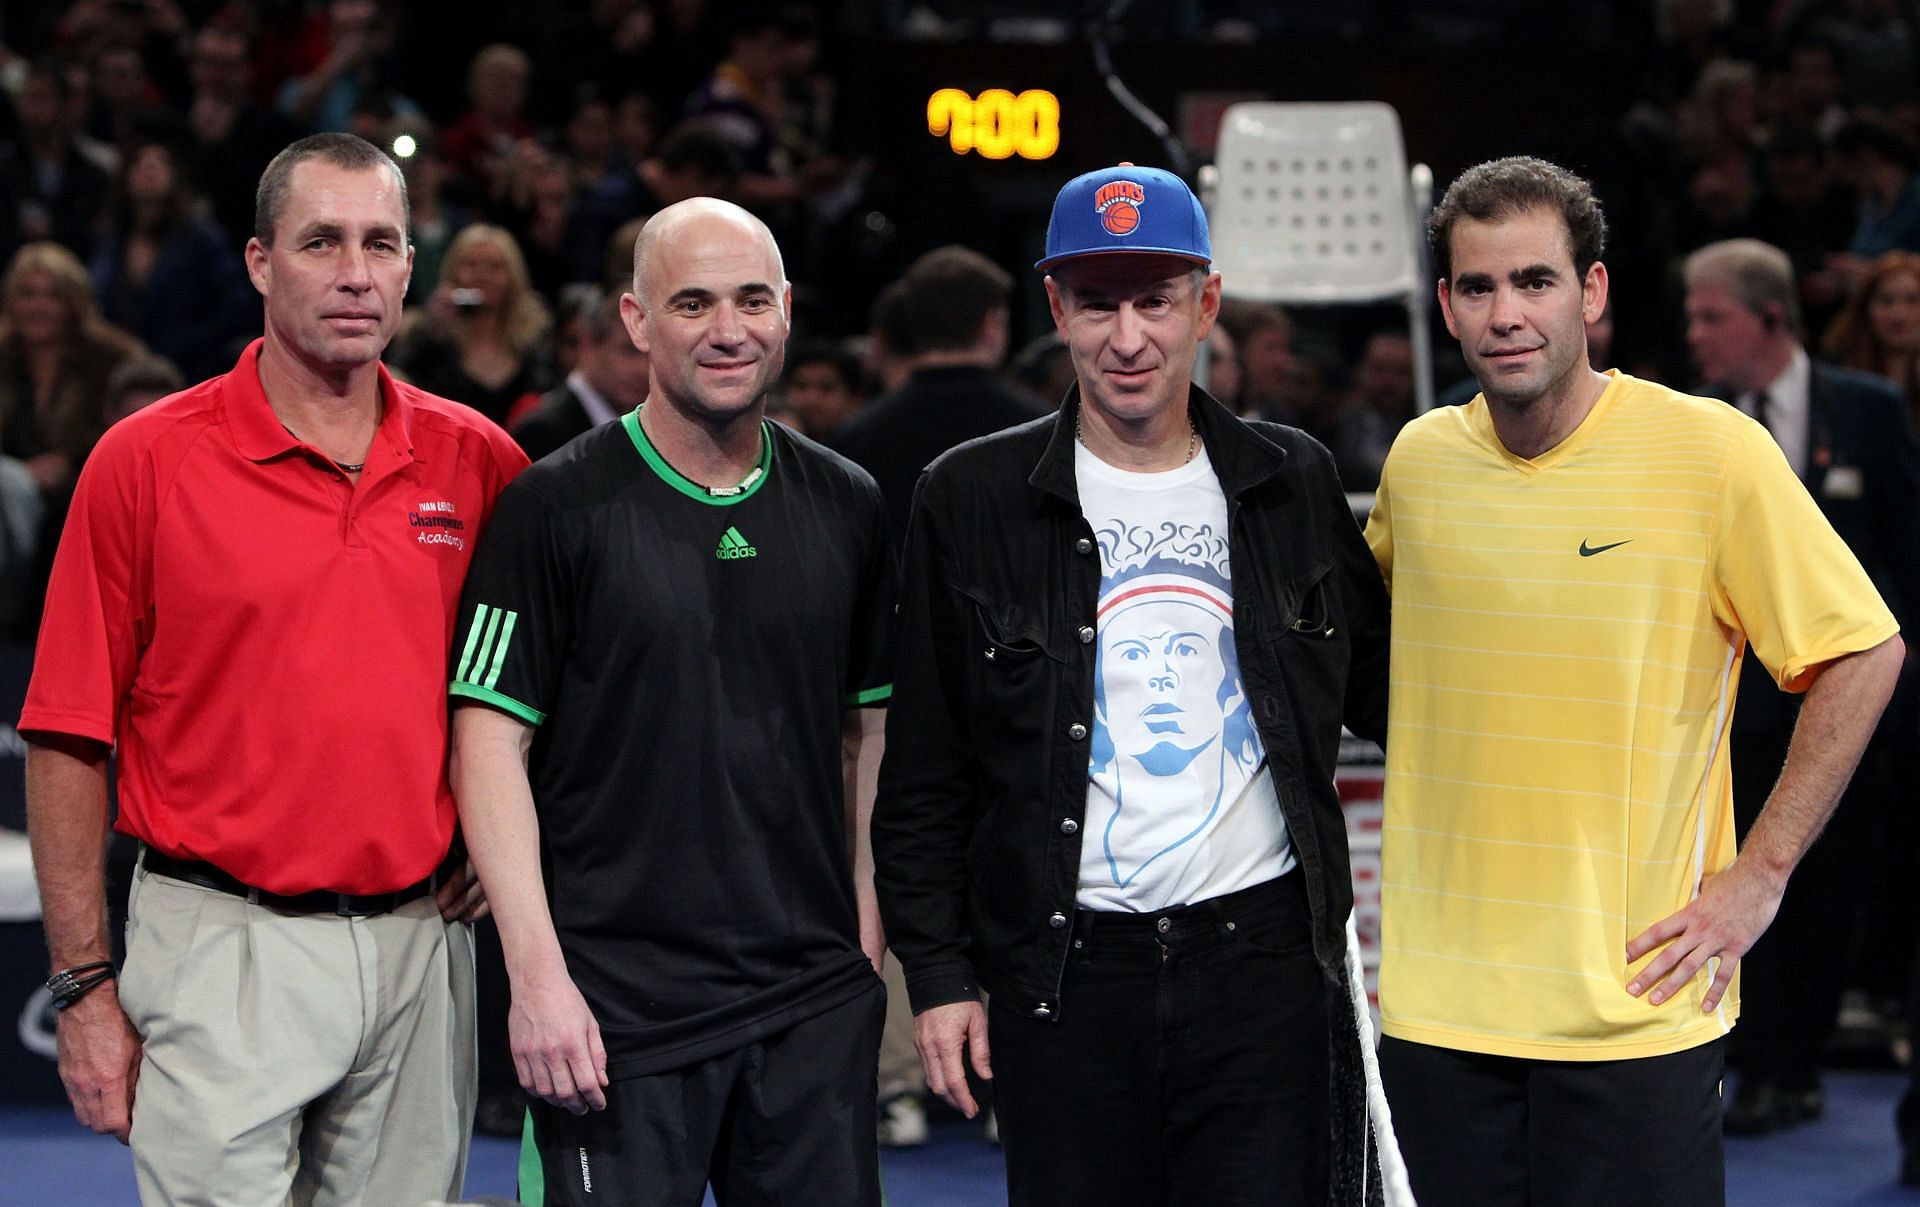 Pete Sampras and Andre Agassi with John McEnroe and Ivan Lendl